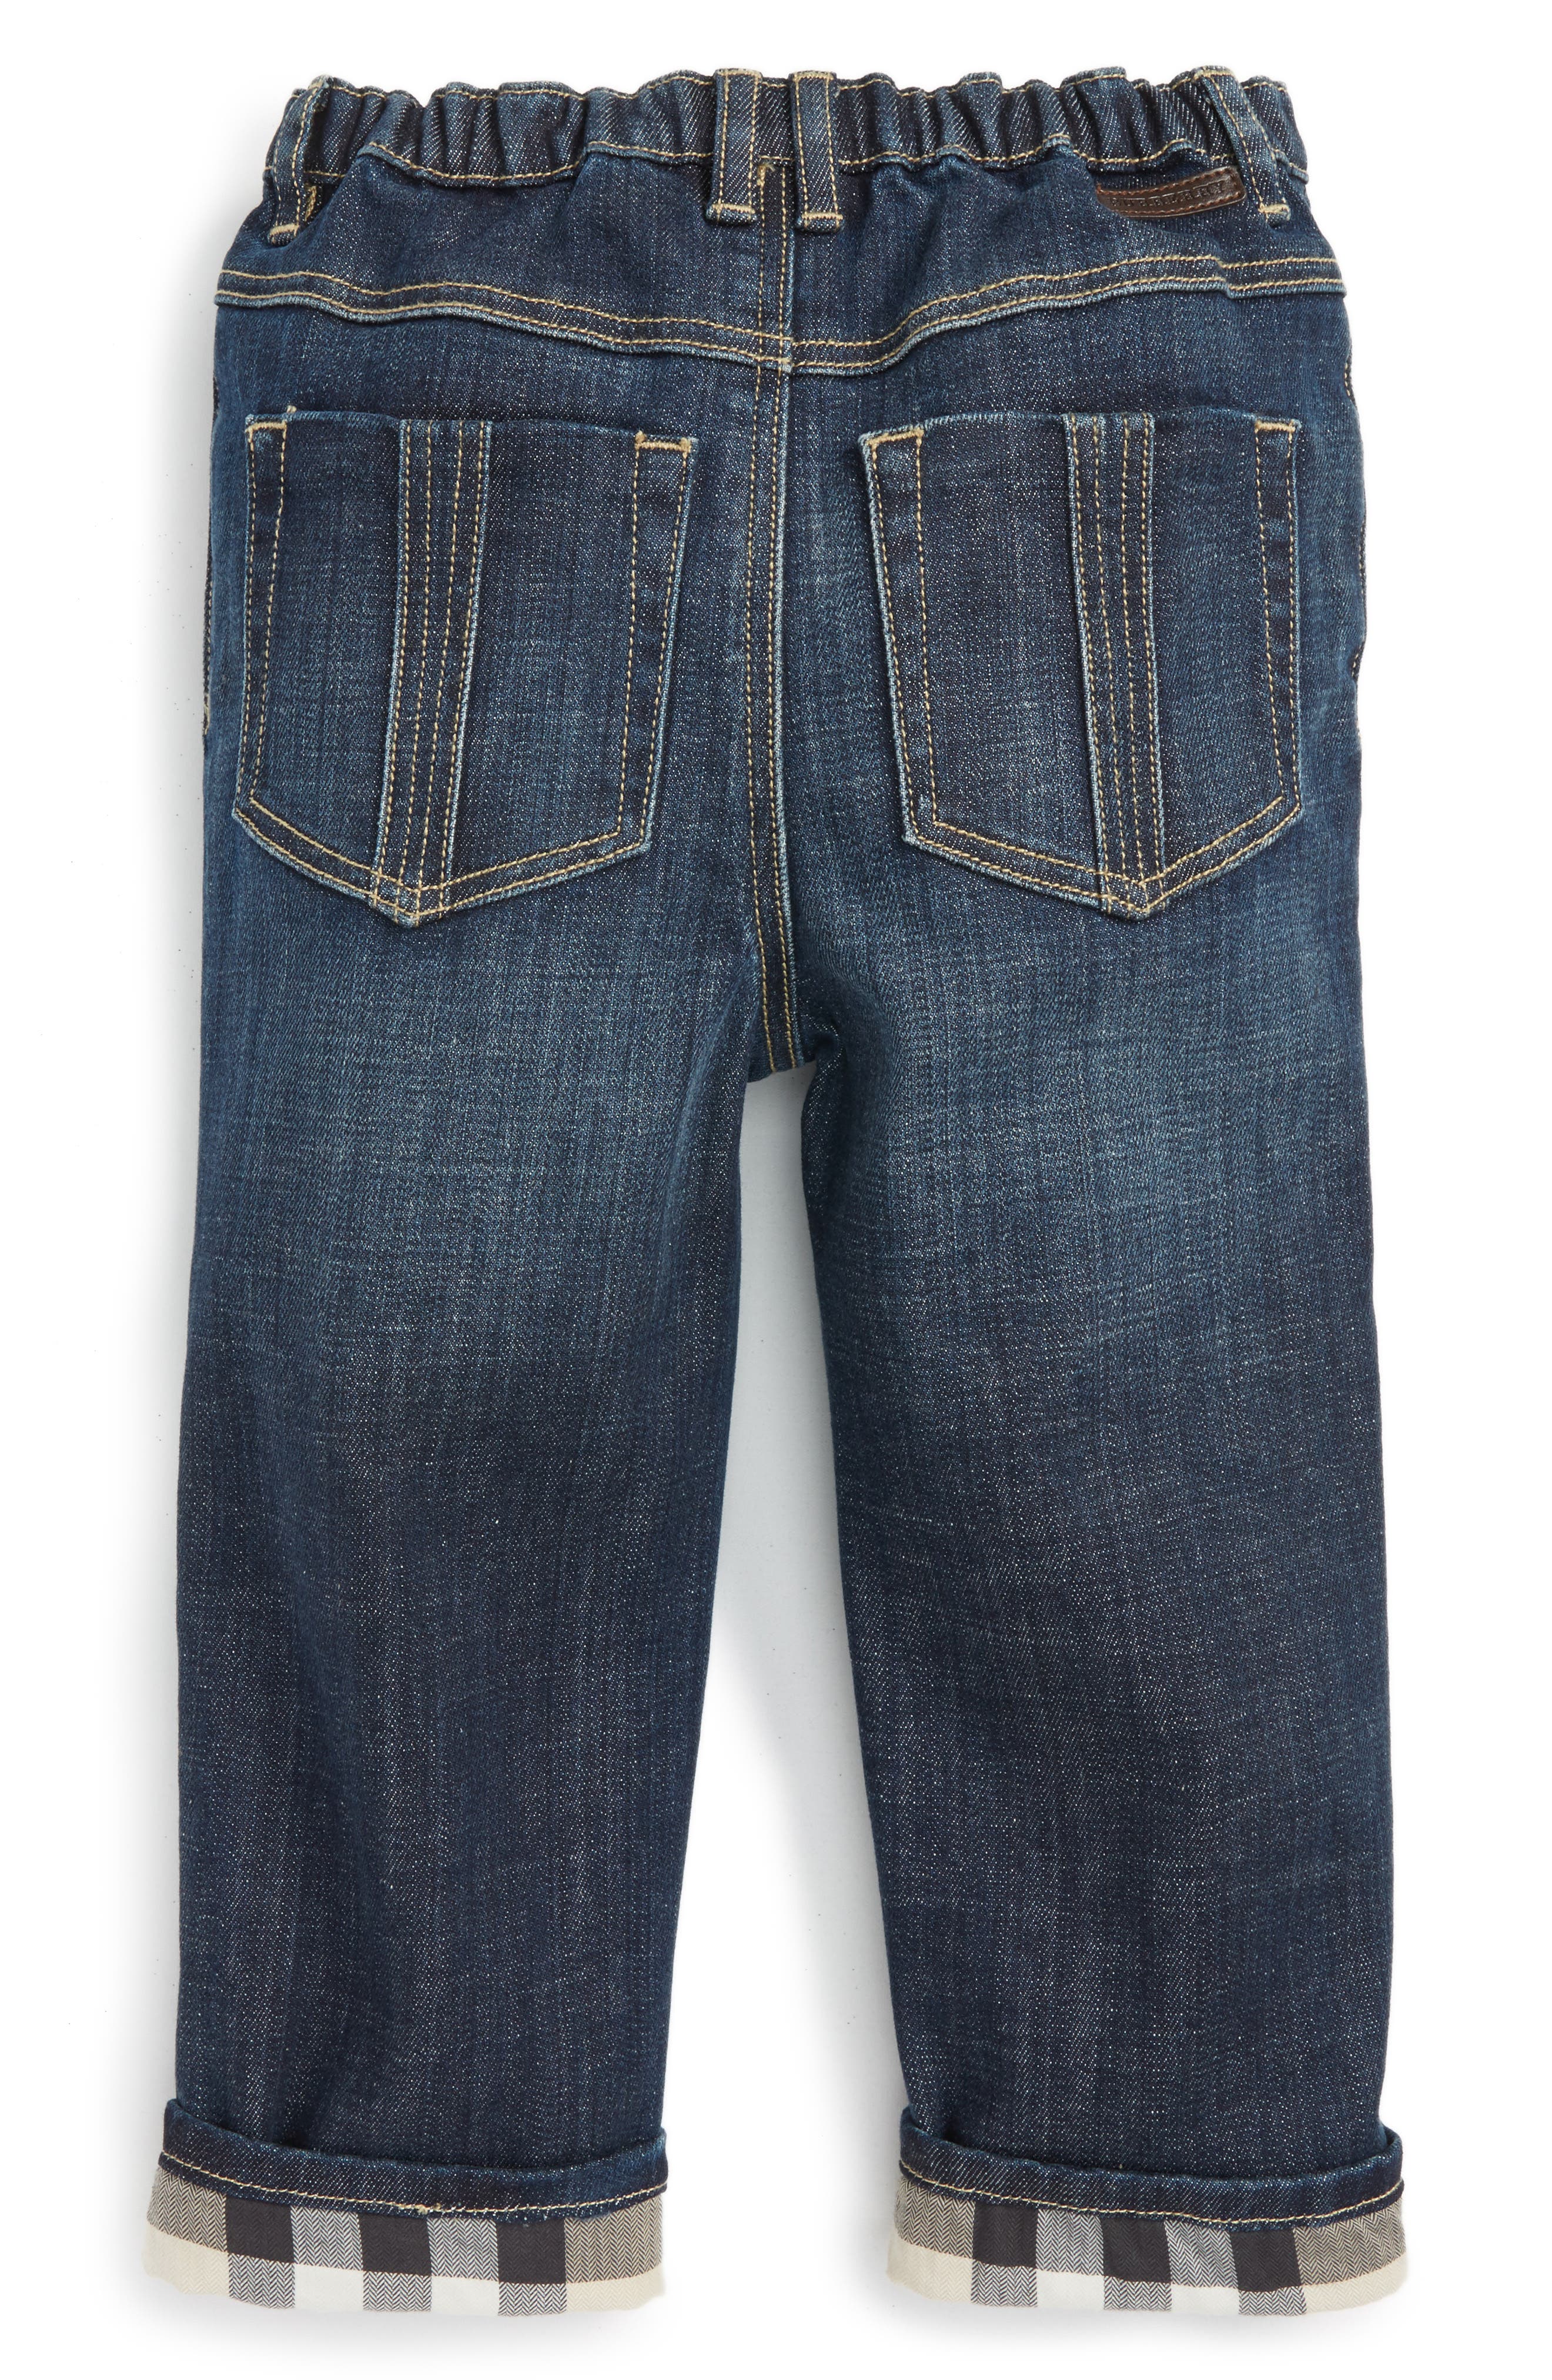 Pierre Check Lined Jeans (Baby Boys 